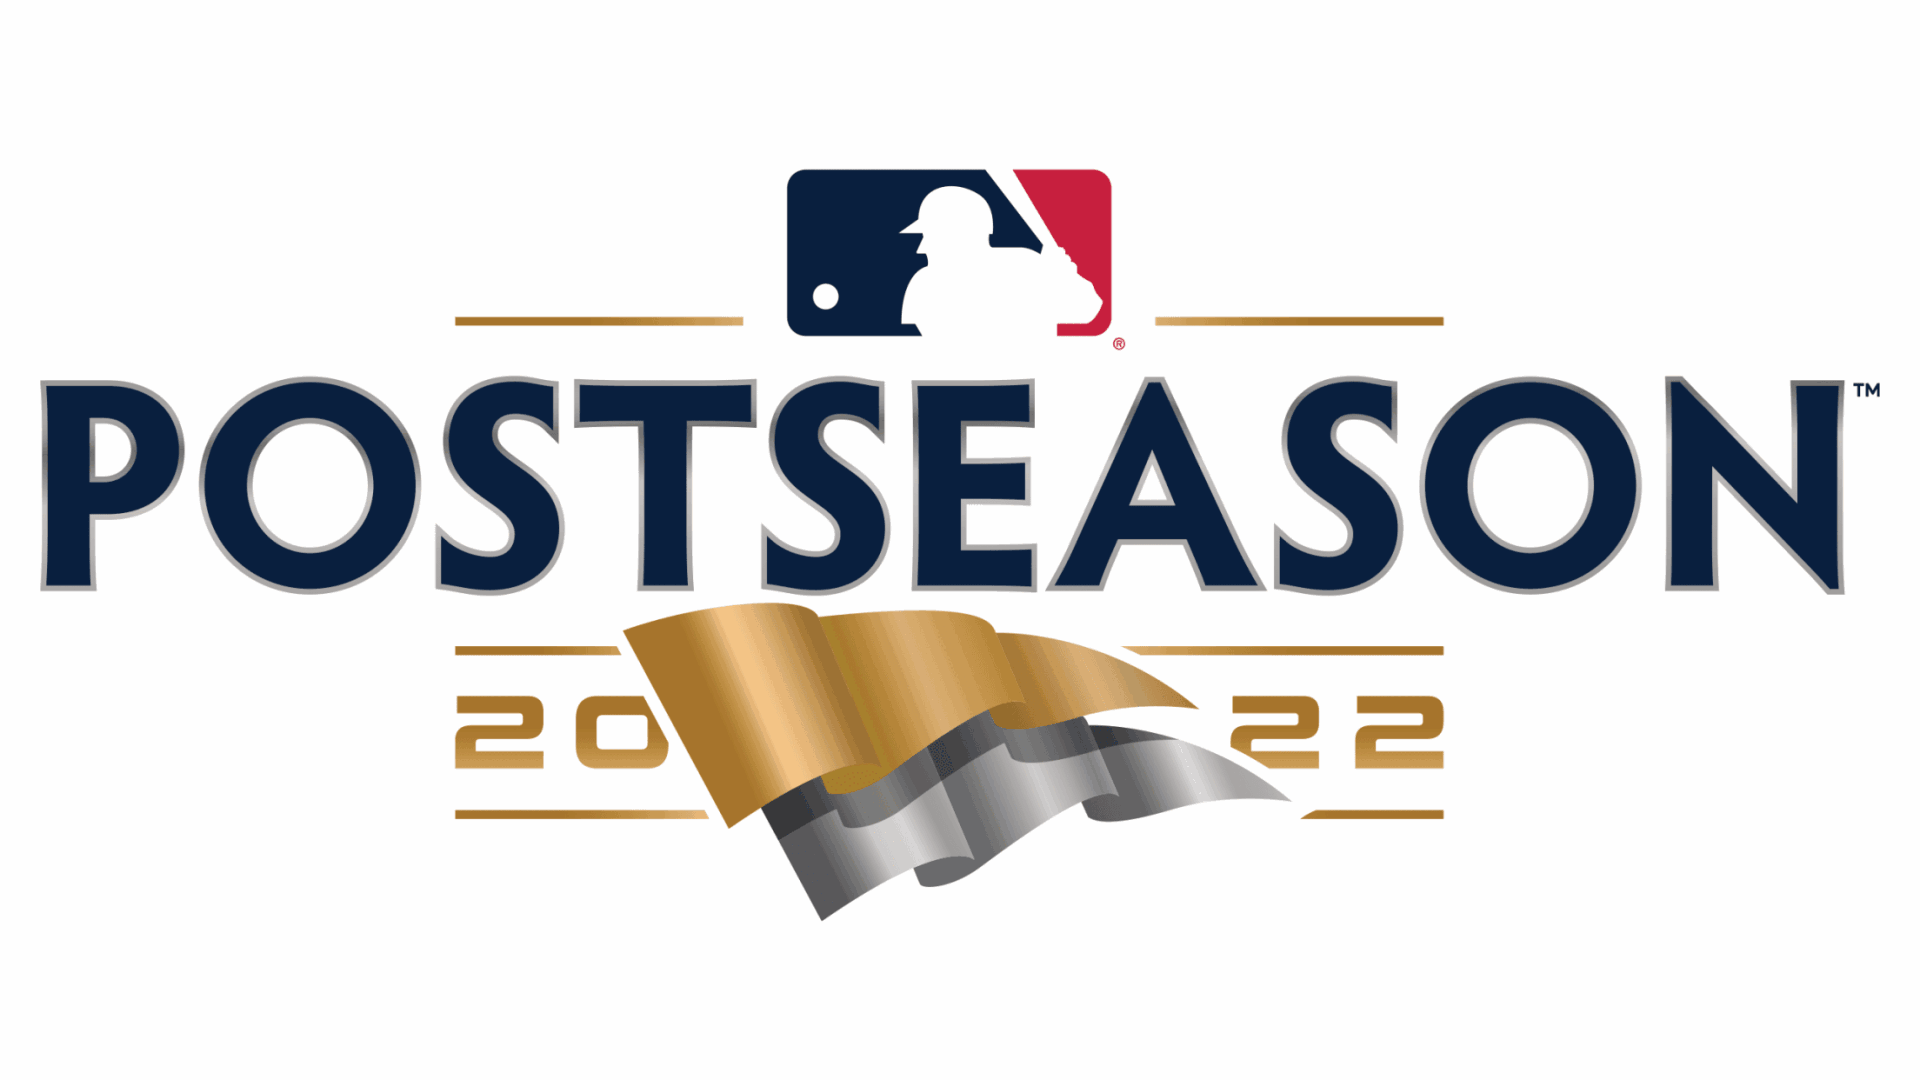 Division Series game time announcement